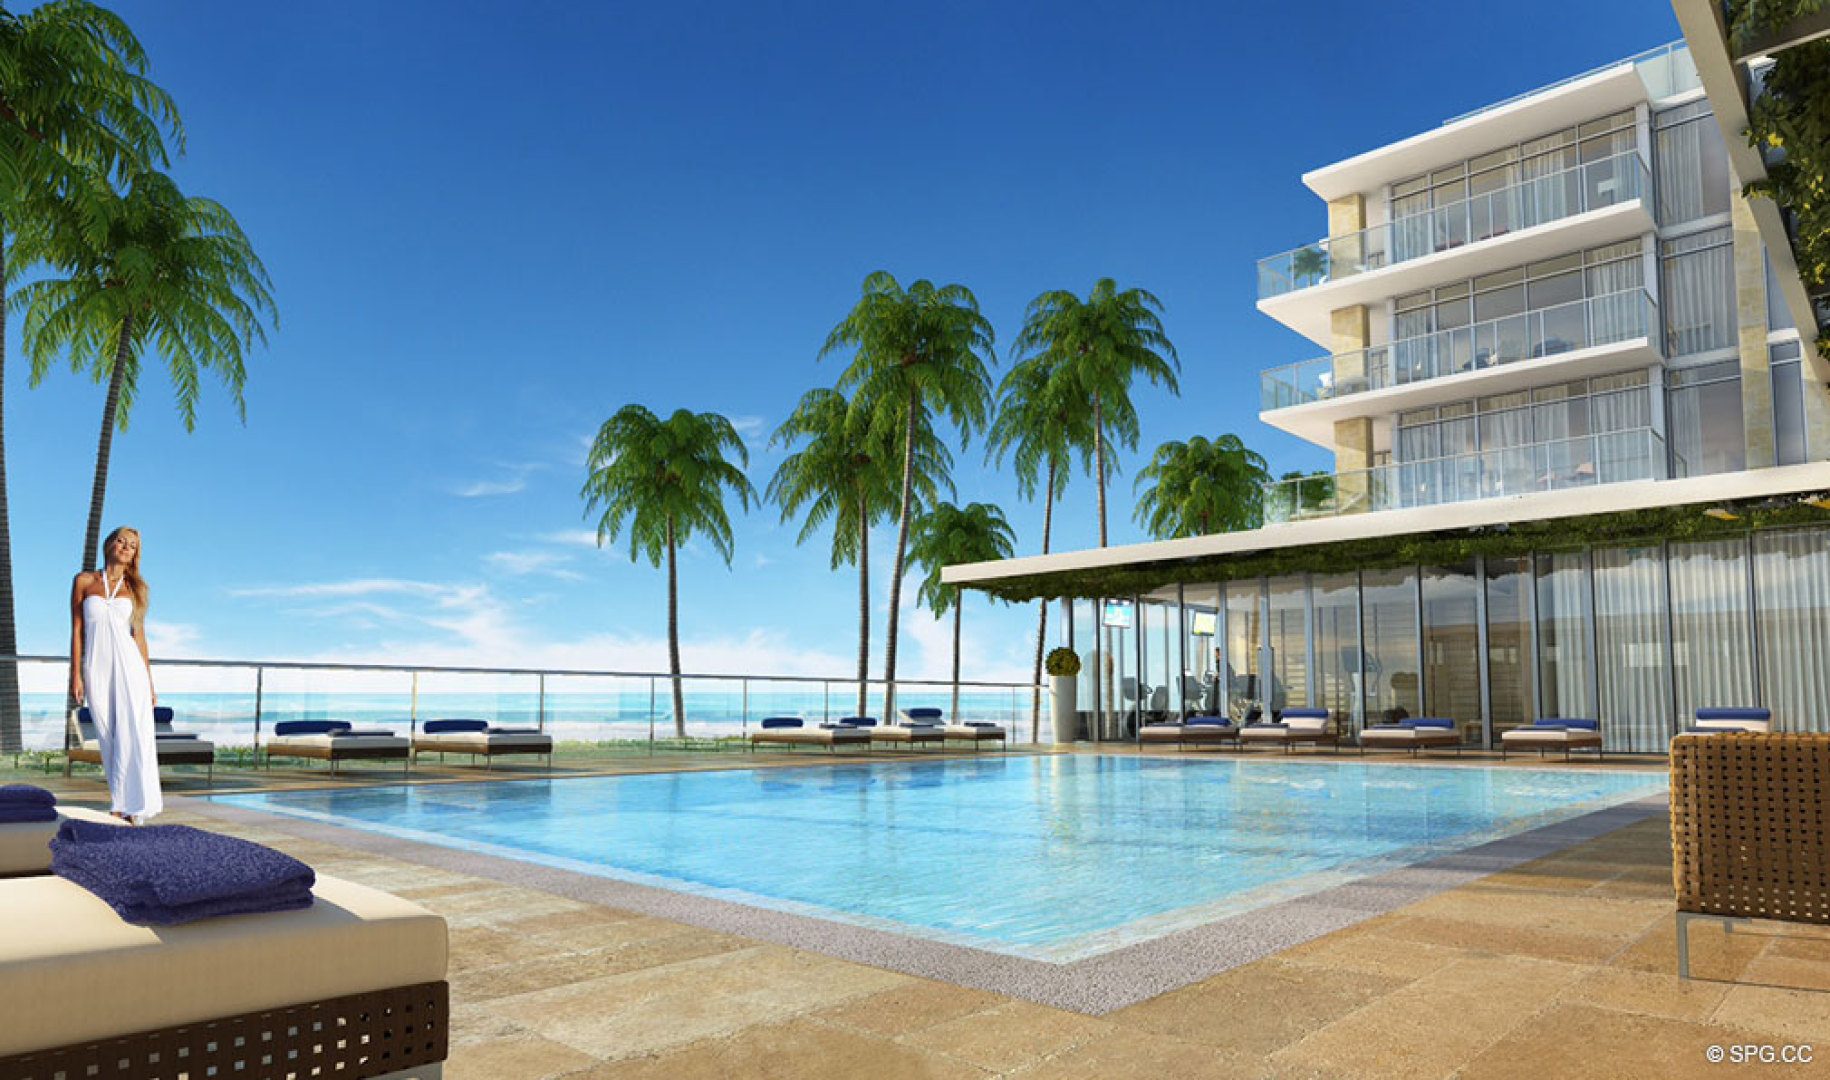 The Beachfront Pool Deck at Sage Beach, Luxury Oceanfront Condos in Hollywood Beach Florida 33019